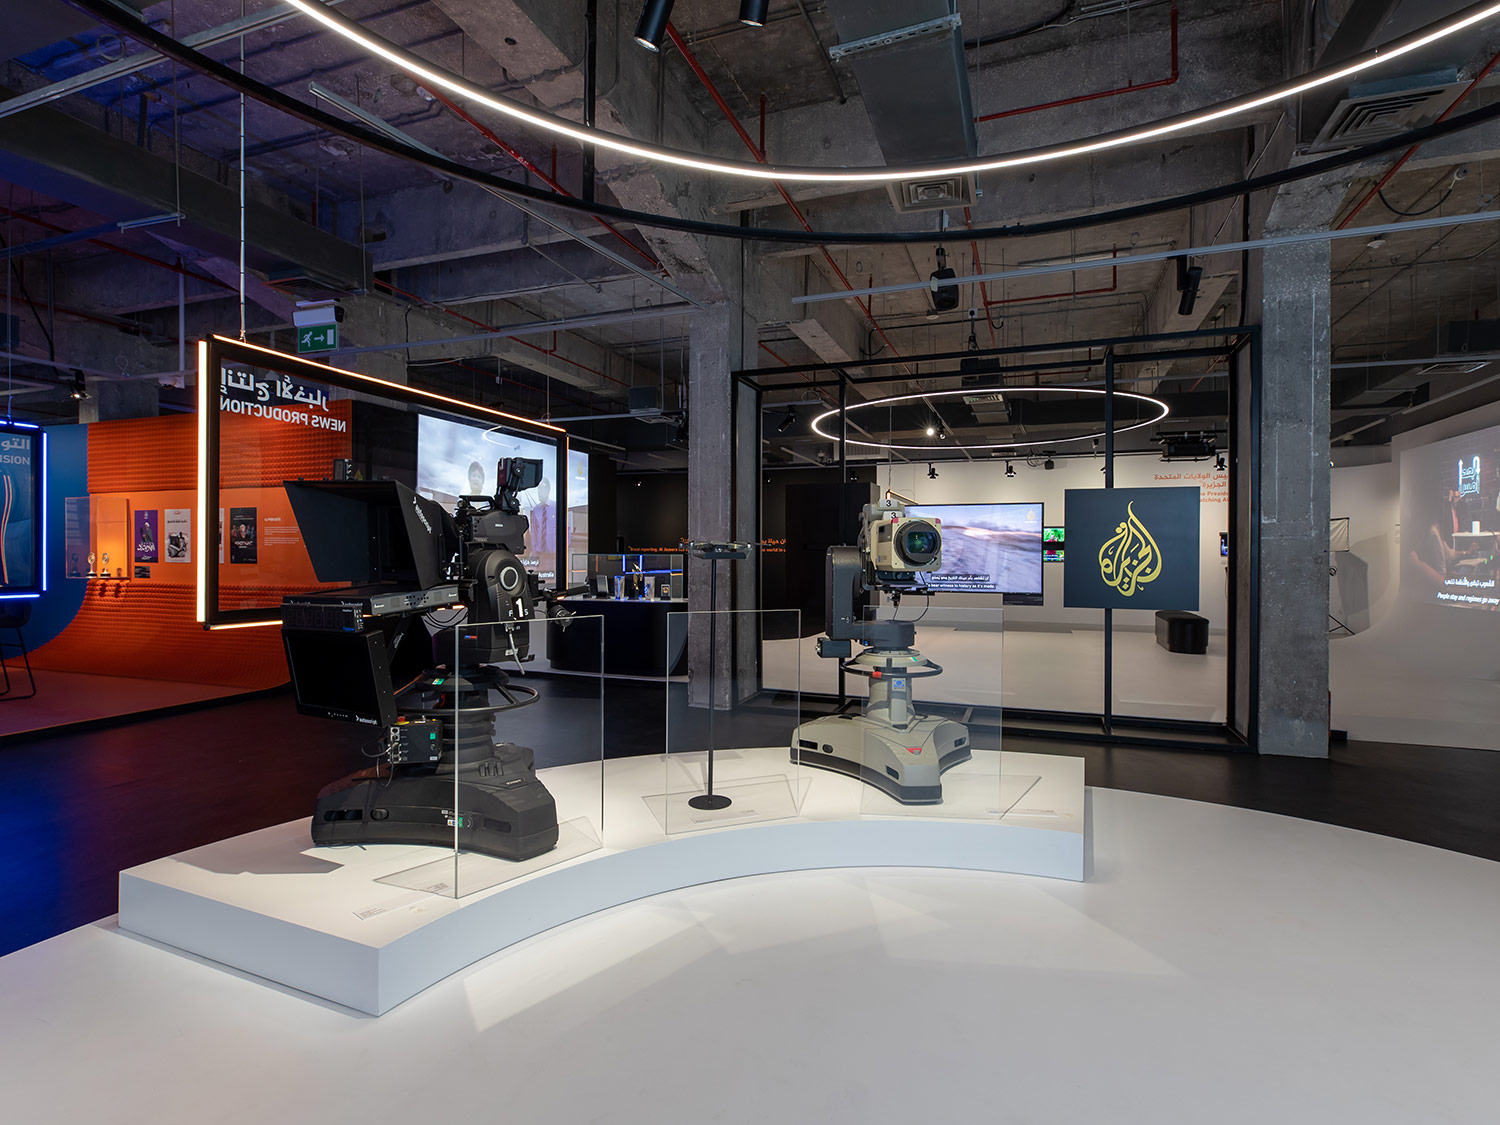 Qatar Museums Presents “Experience Al Jazeera” Exhibition at Fire Station